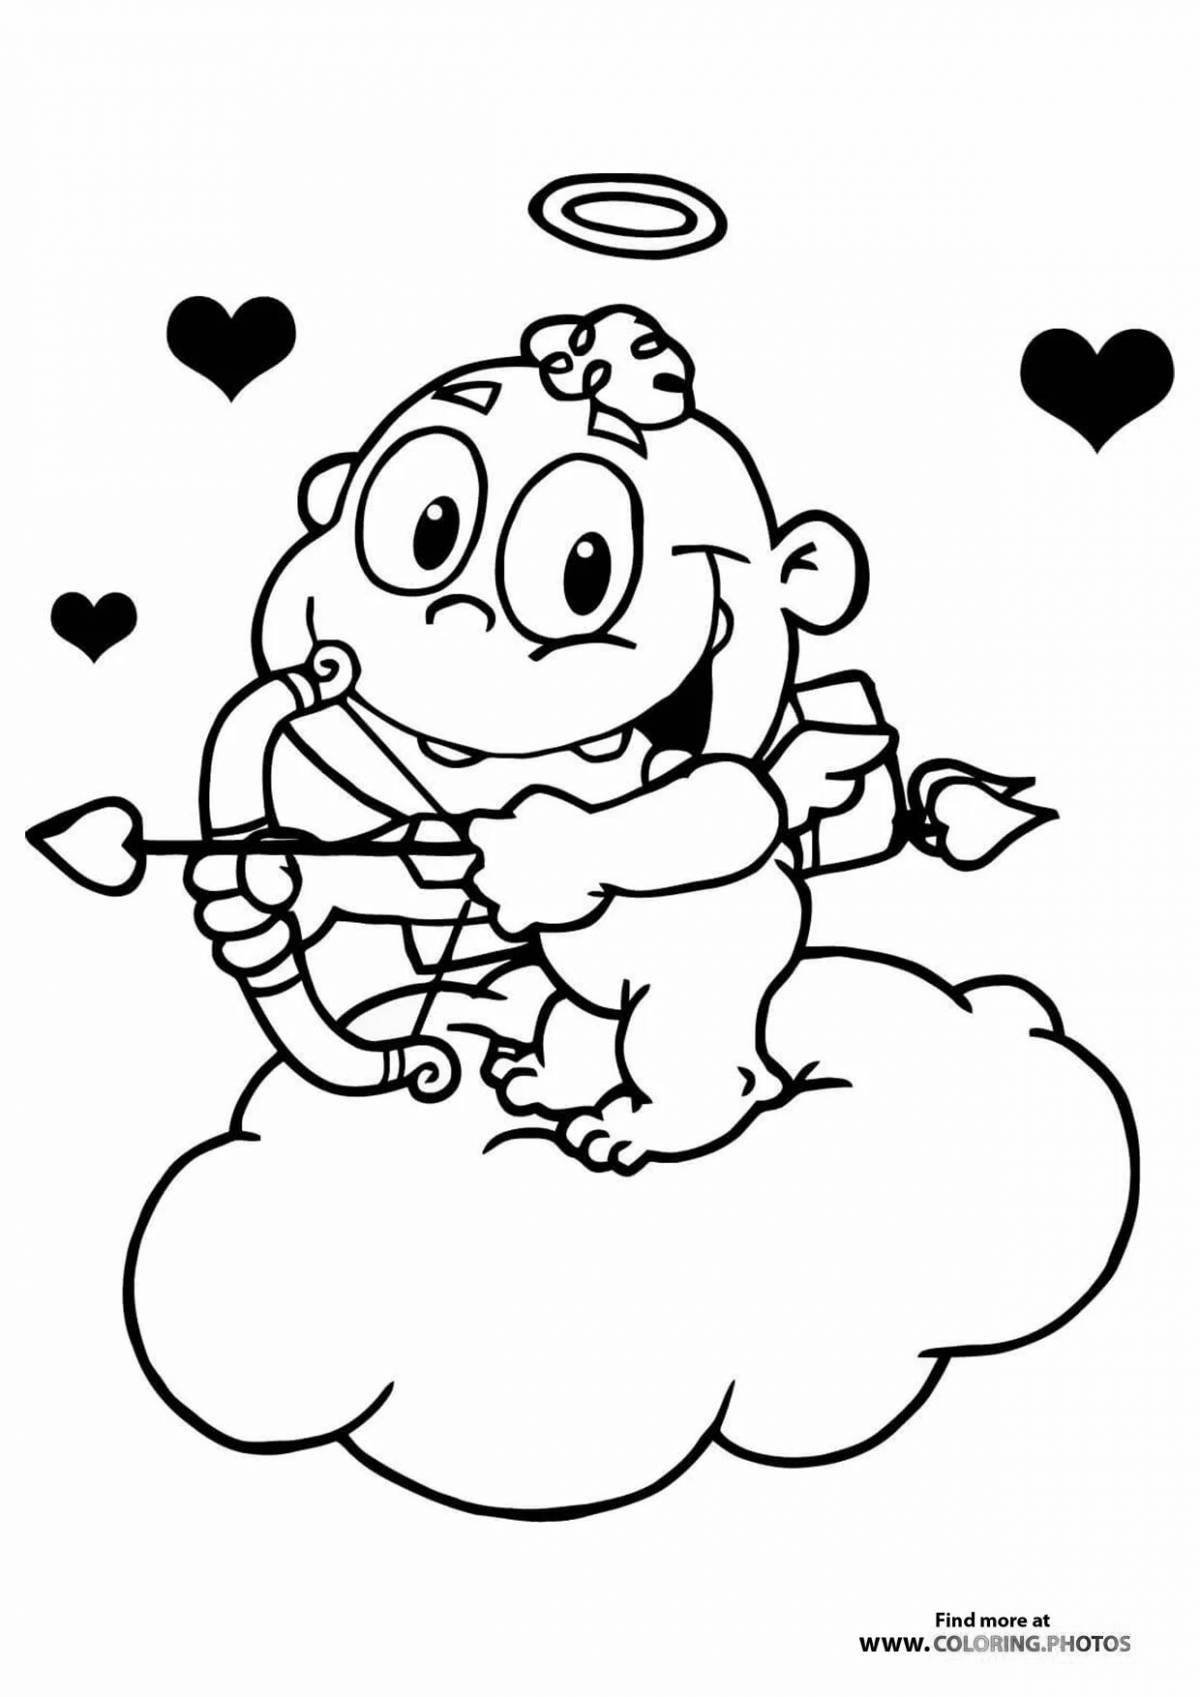 Living cupid with heart coloring book